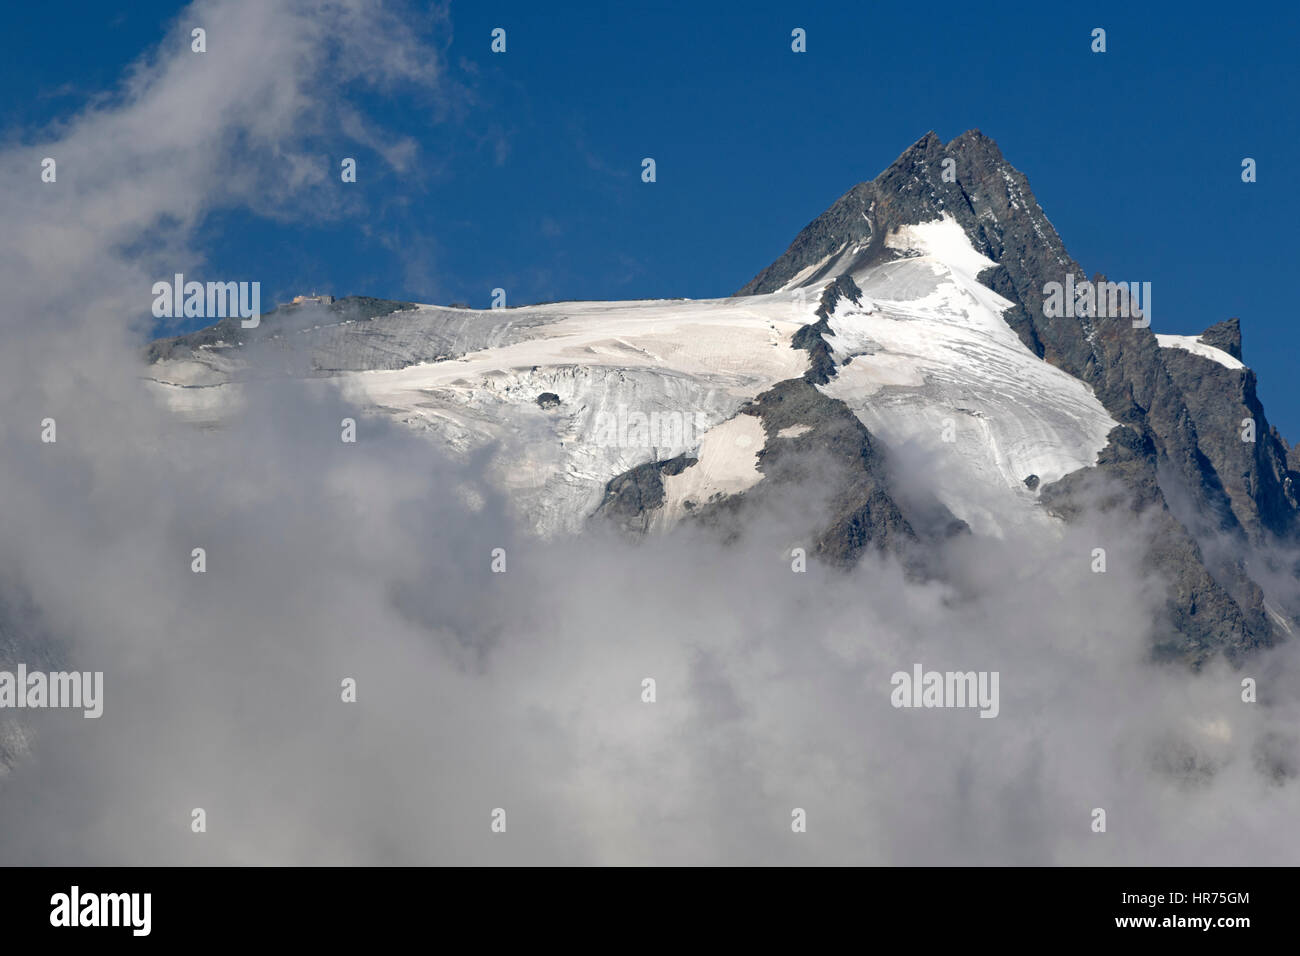 Summit of Mt. Grossglockner with clouds, High Tauern National mountain range, Austria, Europe Stock Photo